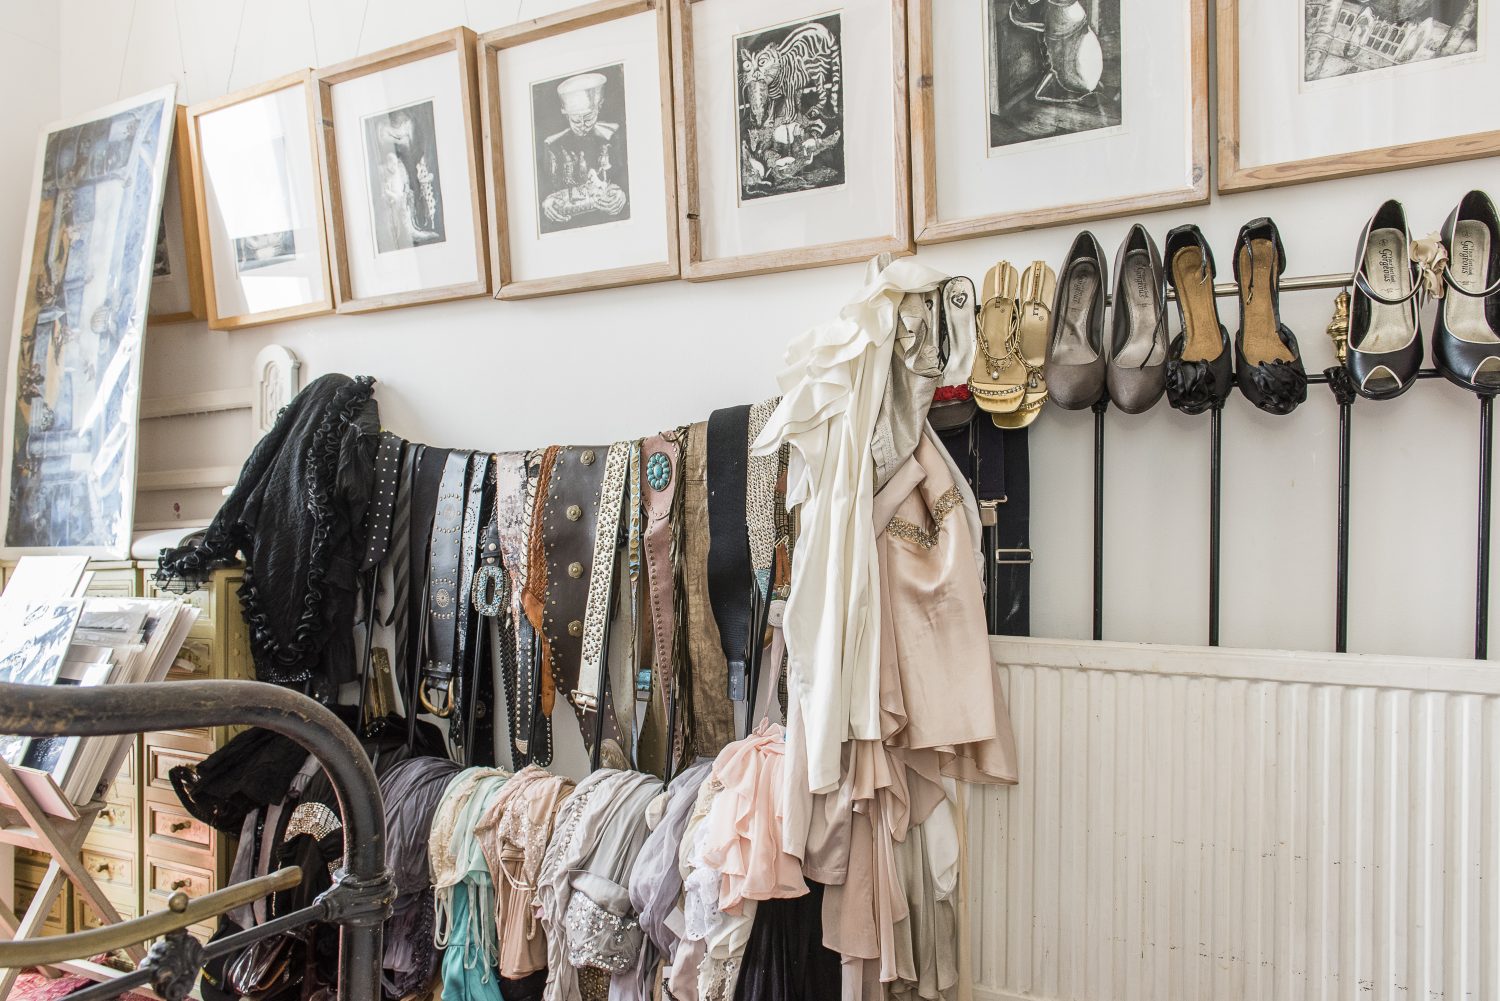 In Sassy’s own smaller bedroom collections of vintage dresses, shoes and belts line the walls